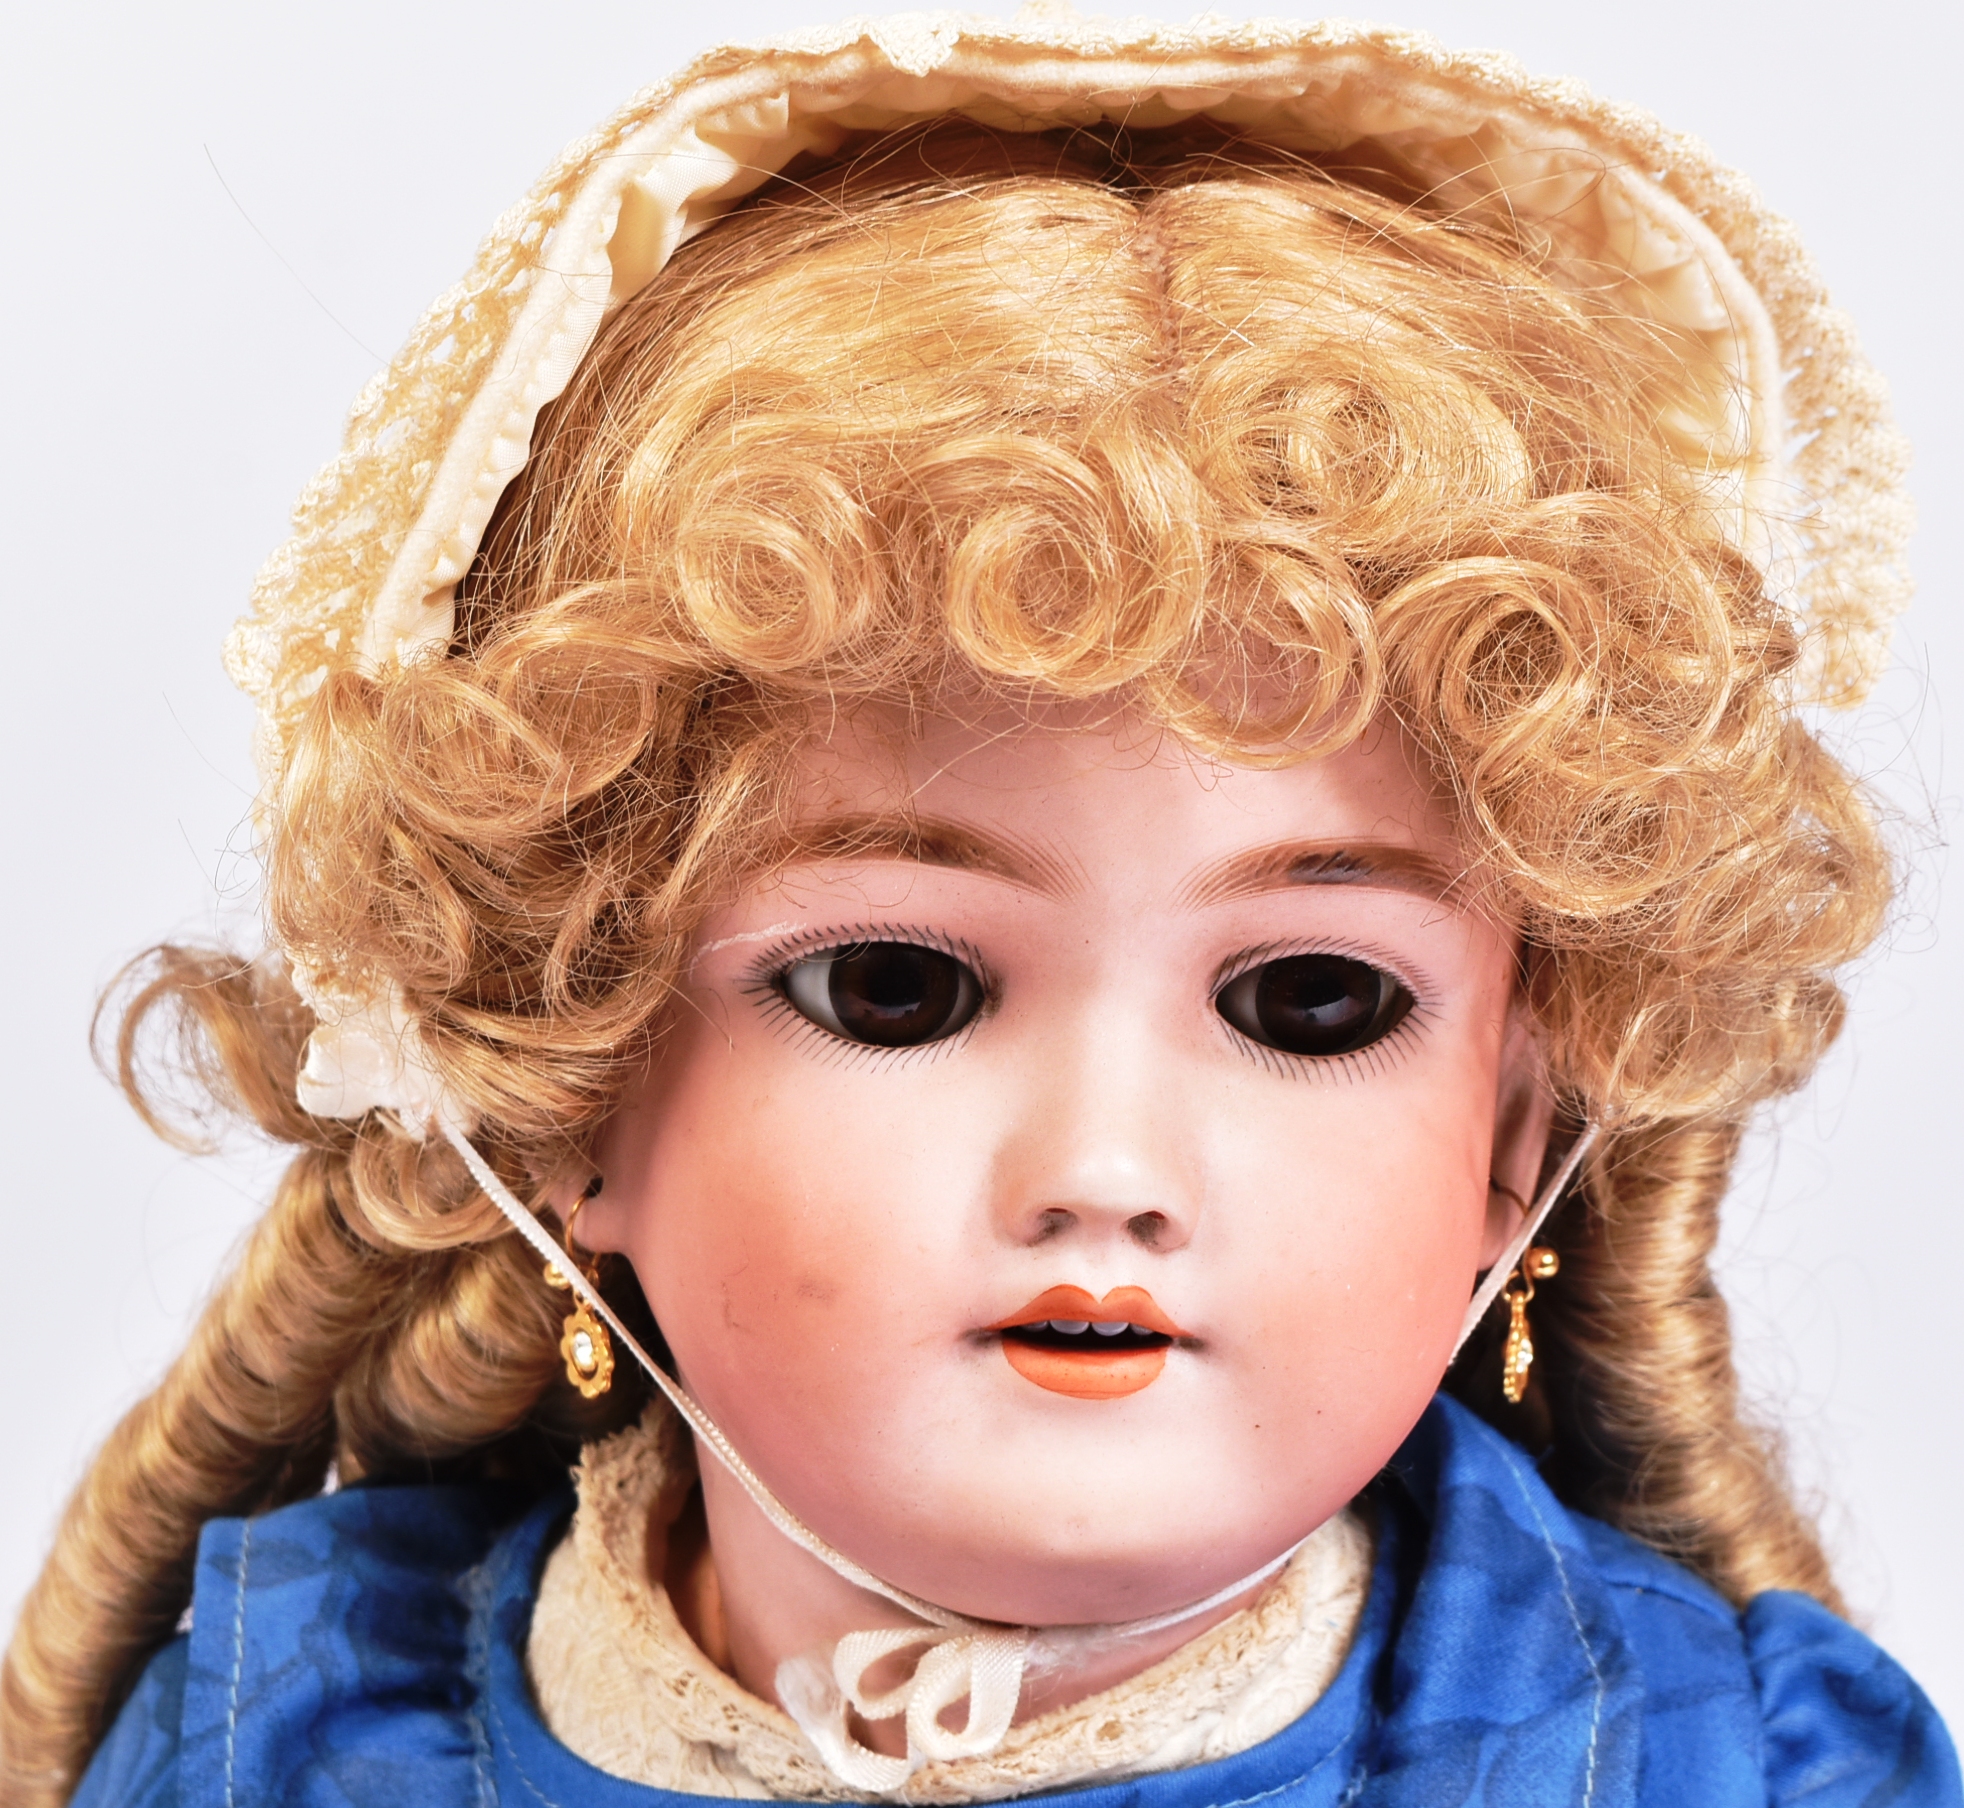 EARLY 20TH CENTURY GERMAN BISQUE HEADED DOLL - Image 2 of 6